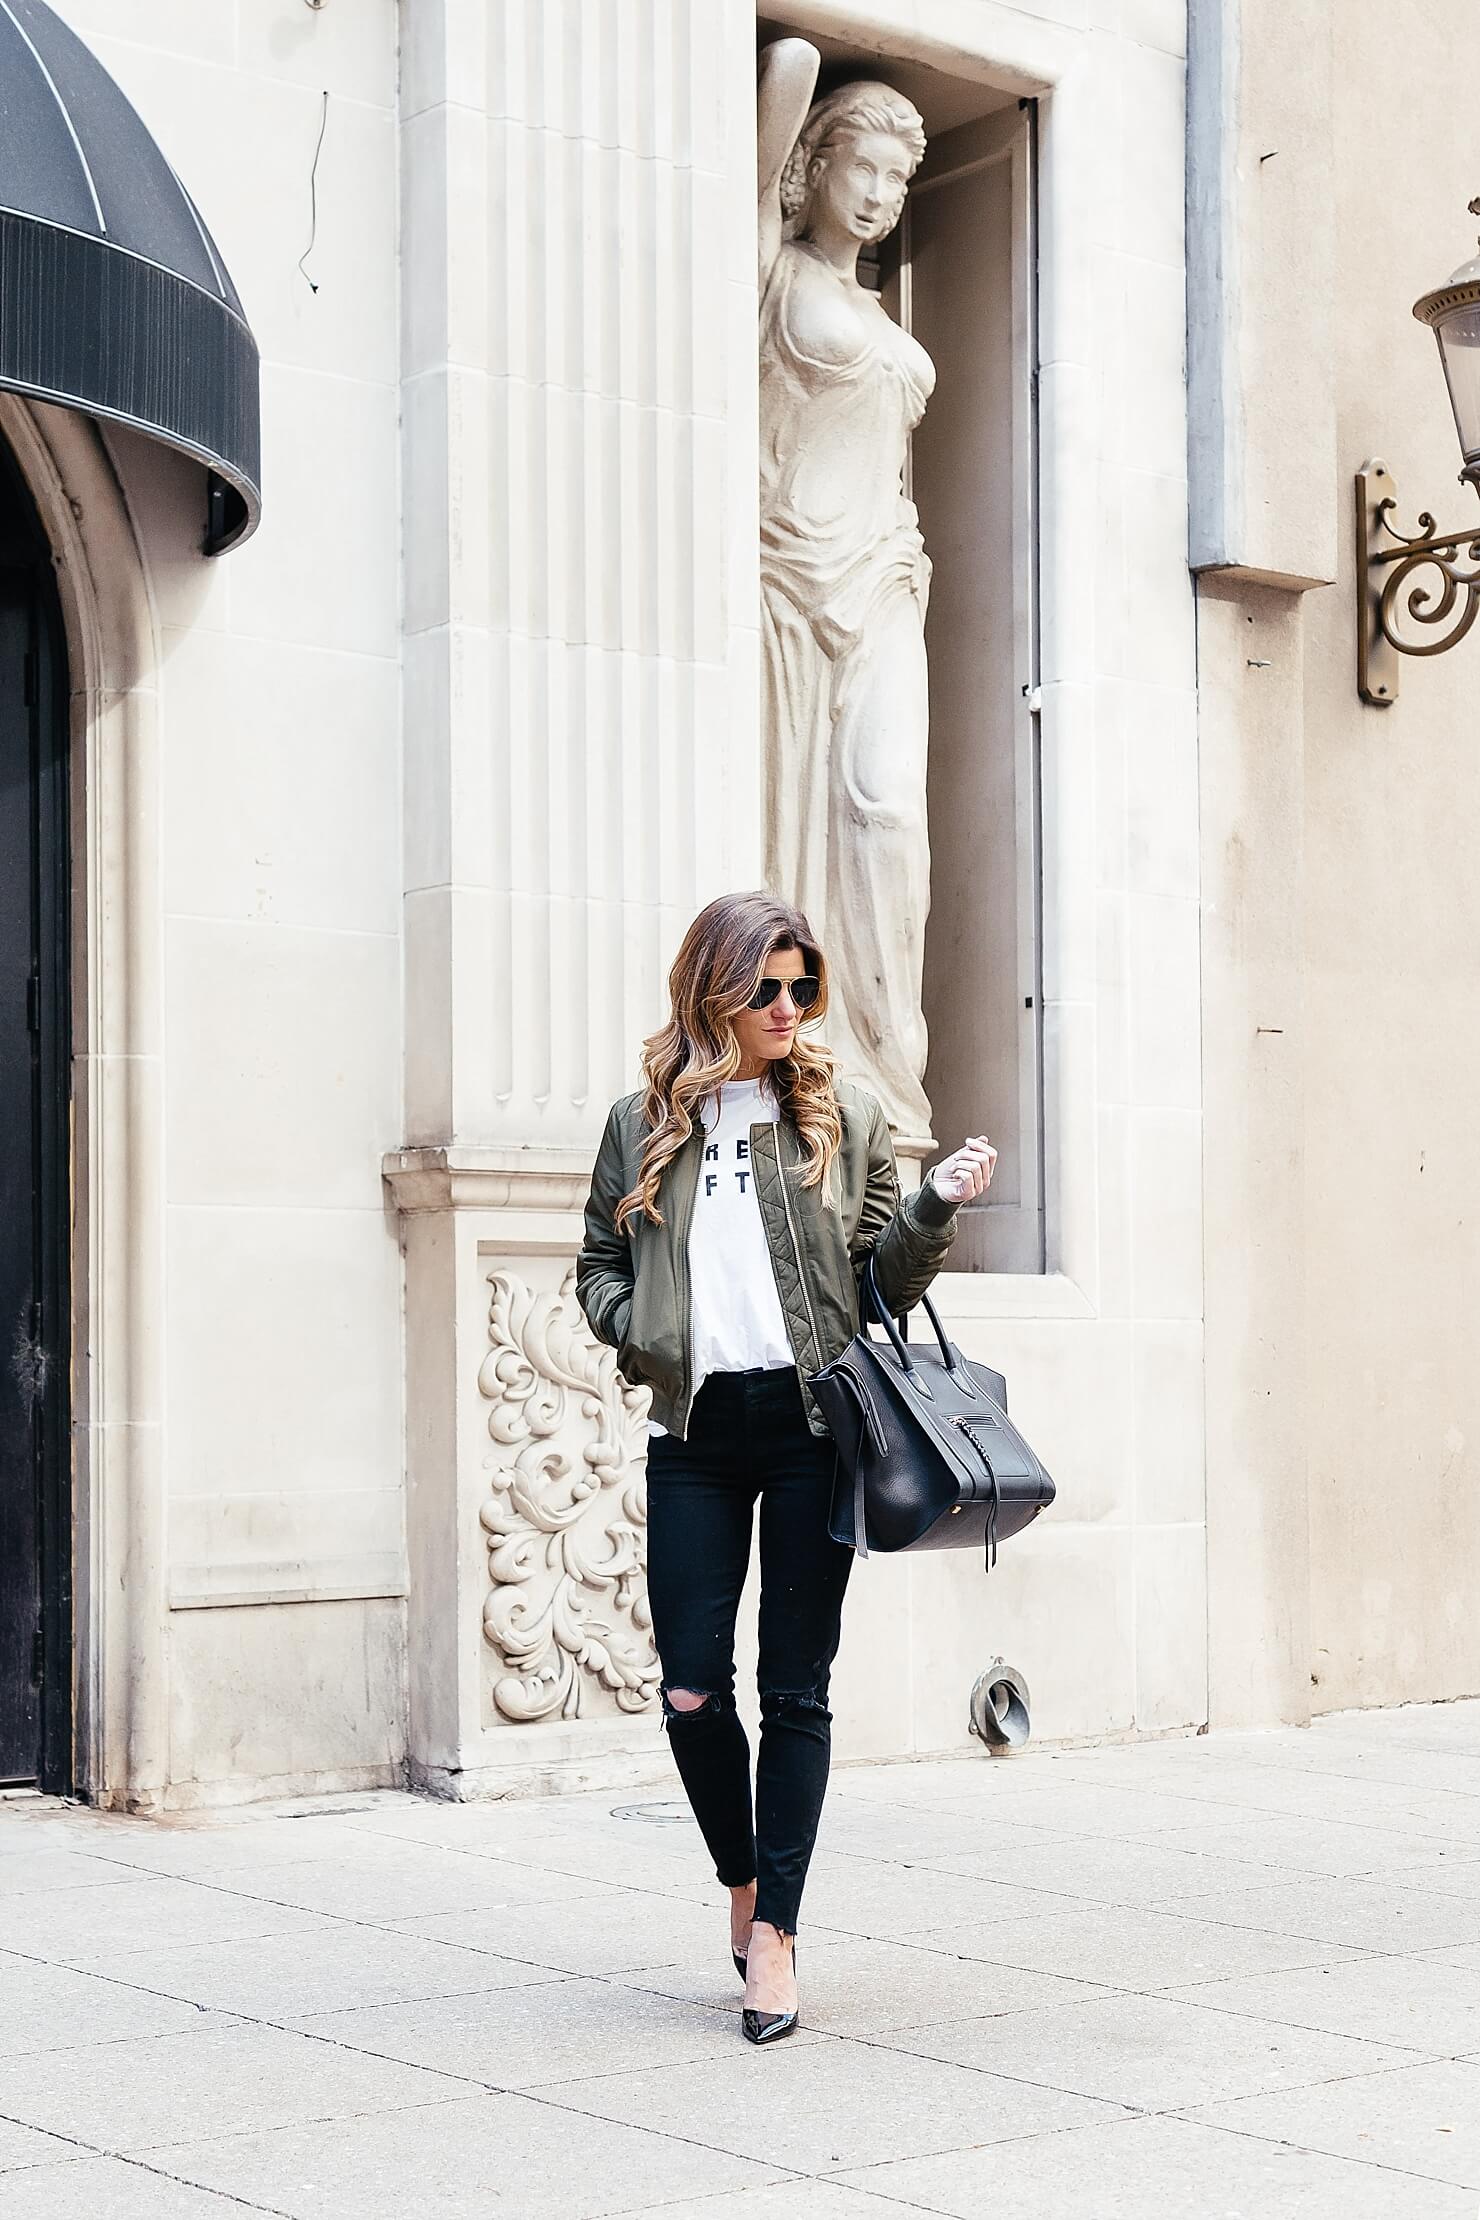 how to wear a bomber jacket, topshop olive green bomber jacket, sincerely jules dream often white tee, mother slit knee denim, patent leather pumps, dressing up a tee shirt, bomber jacket outfit